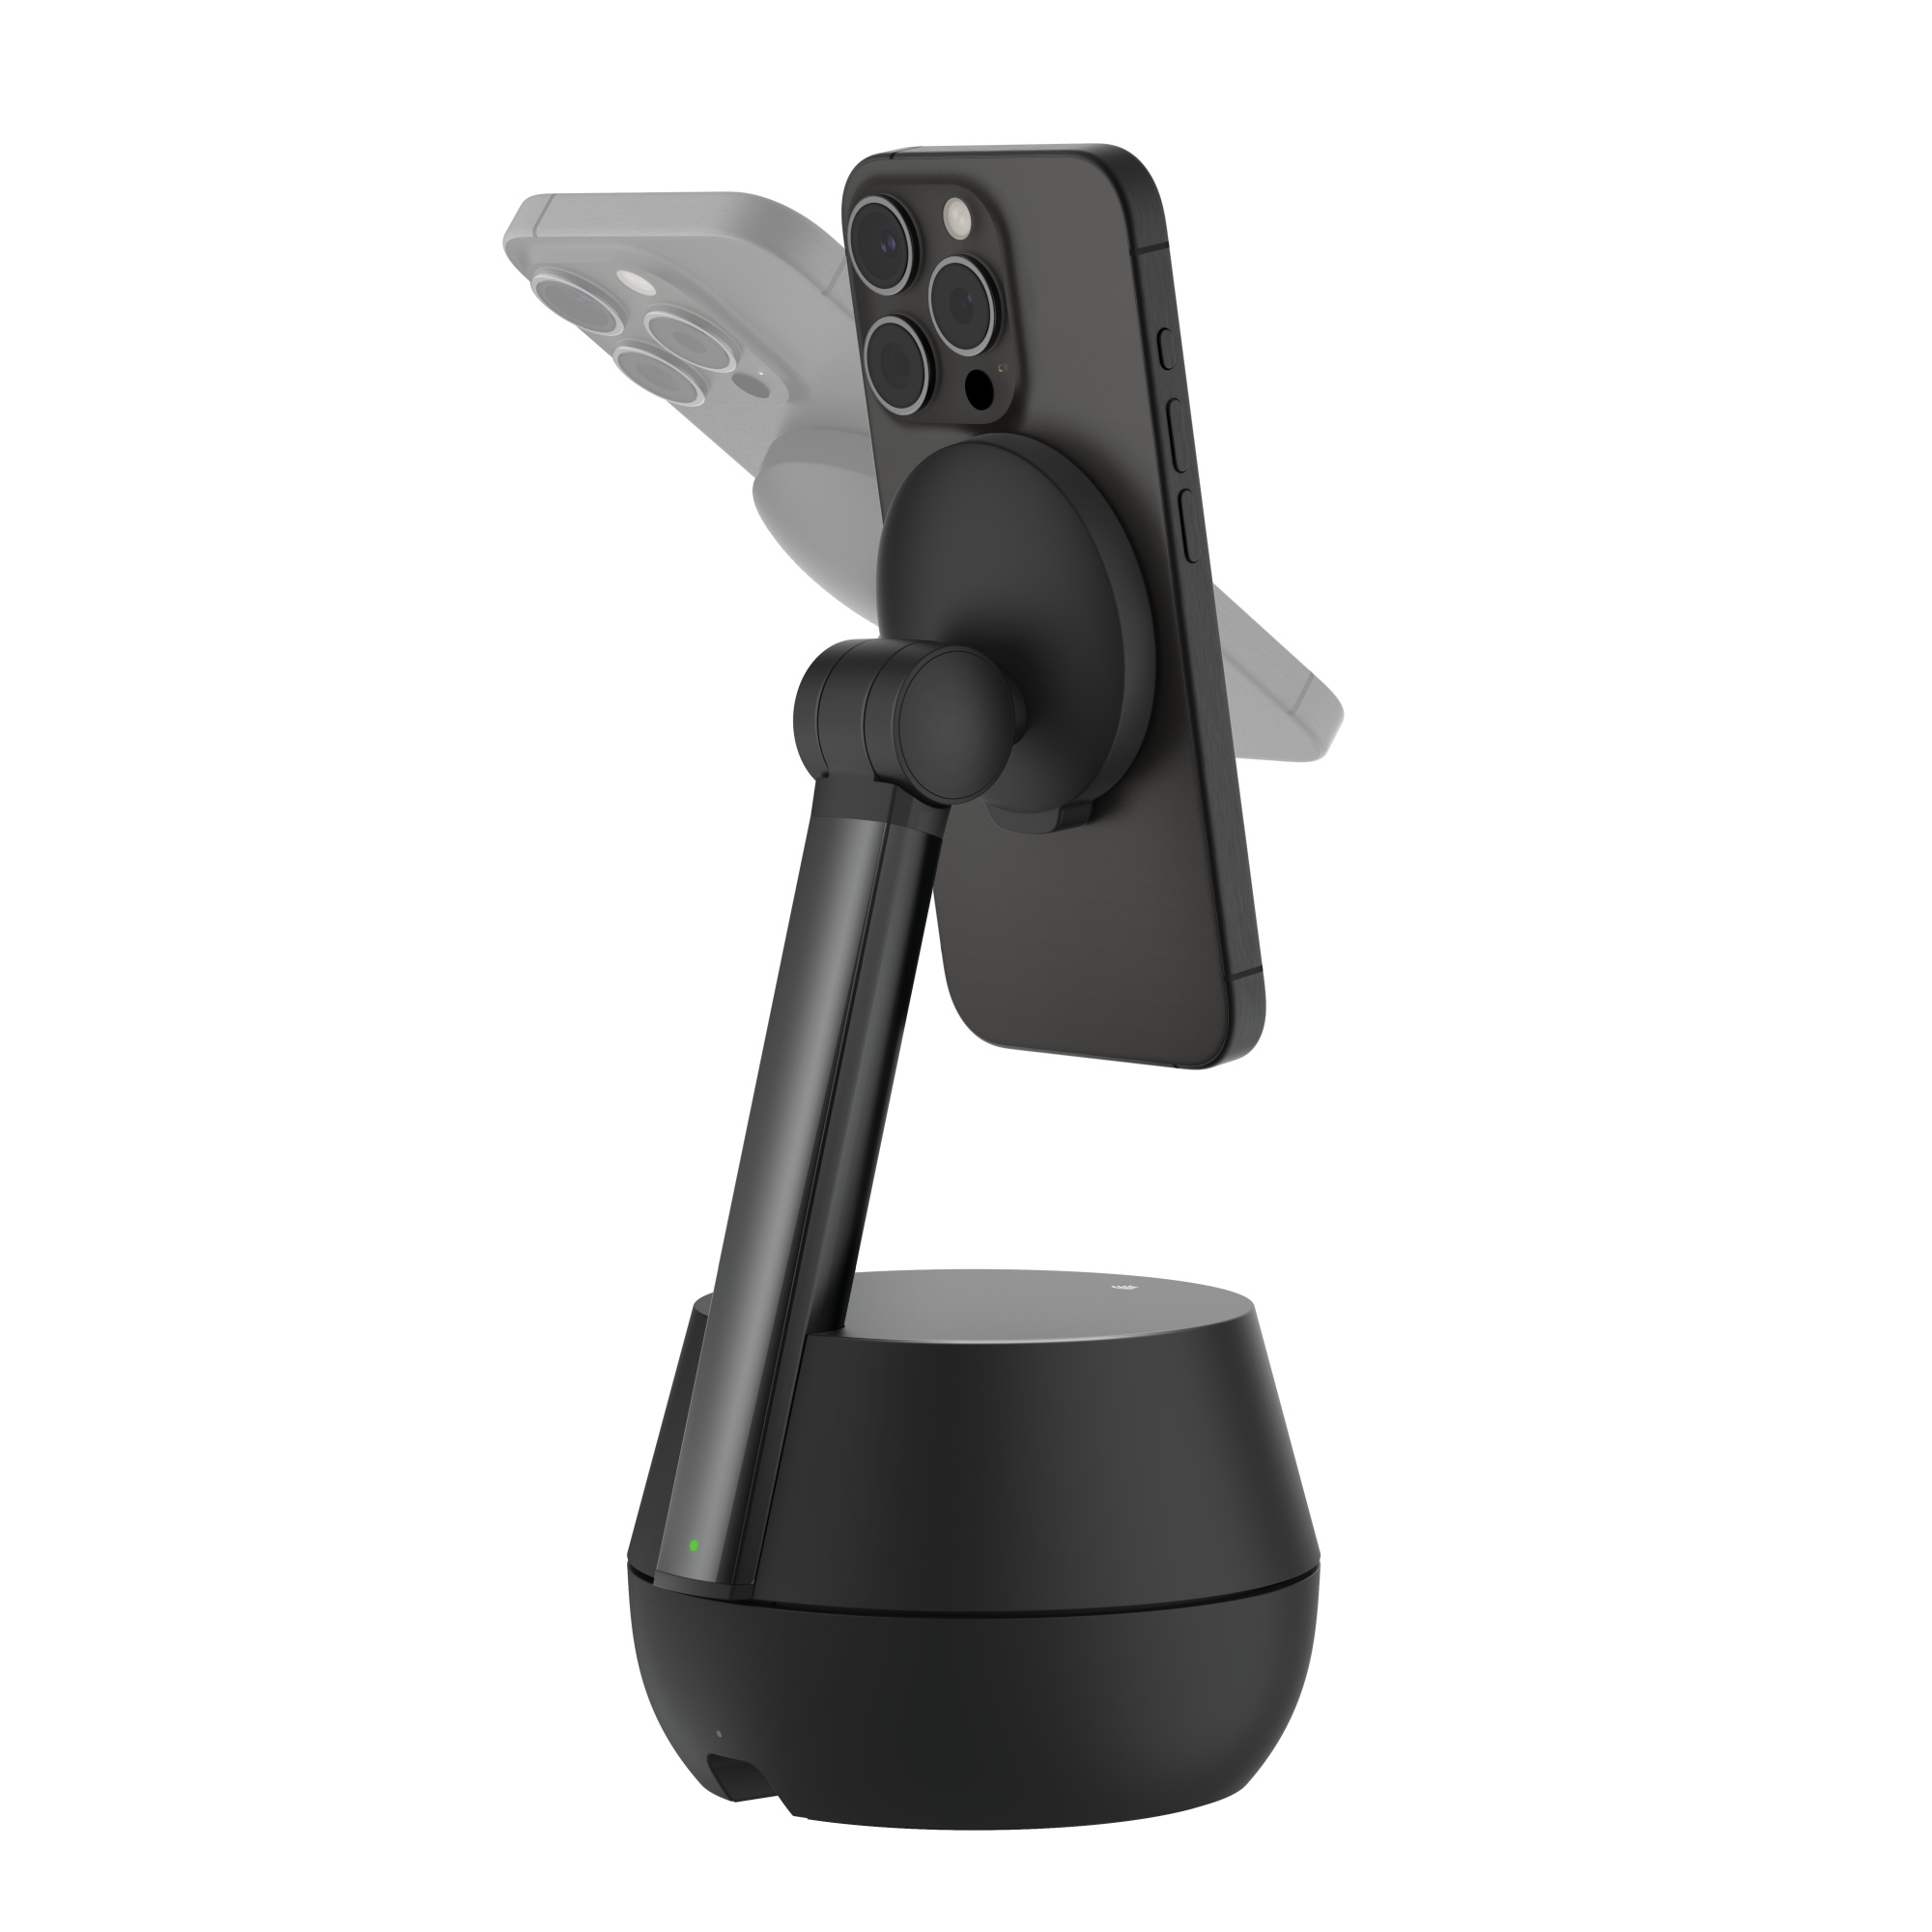 An iPhone on the Belkin Auto-Tracking Stand Pro showing the wide movement range.